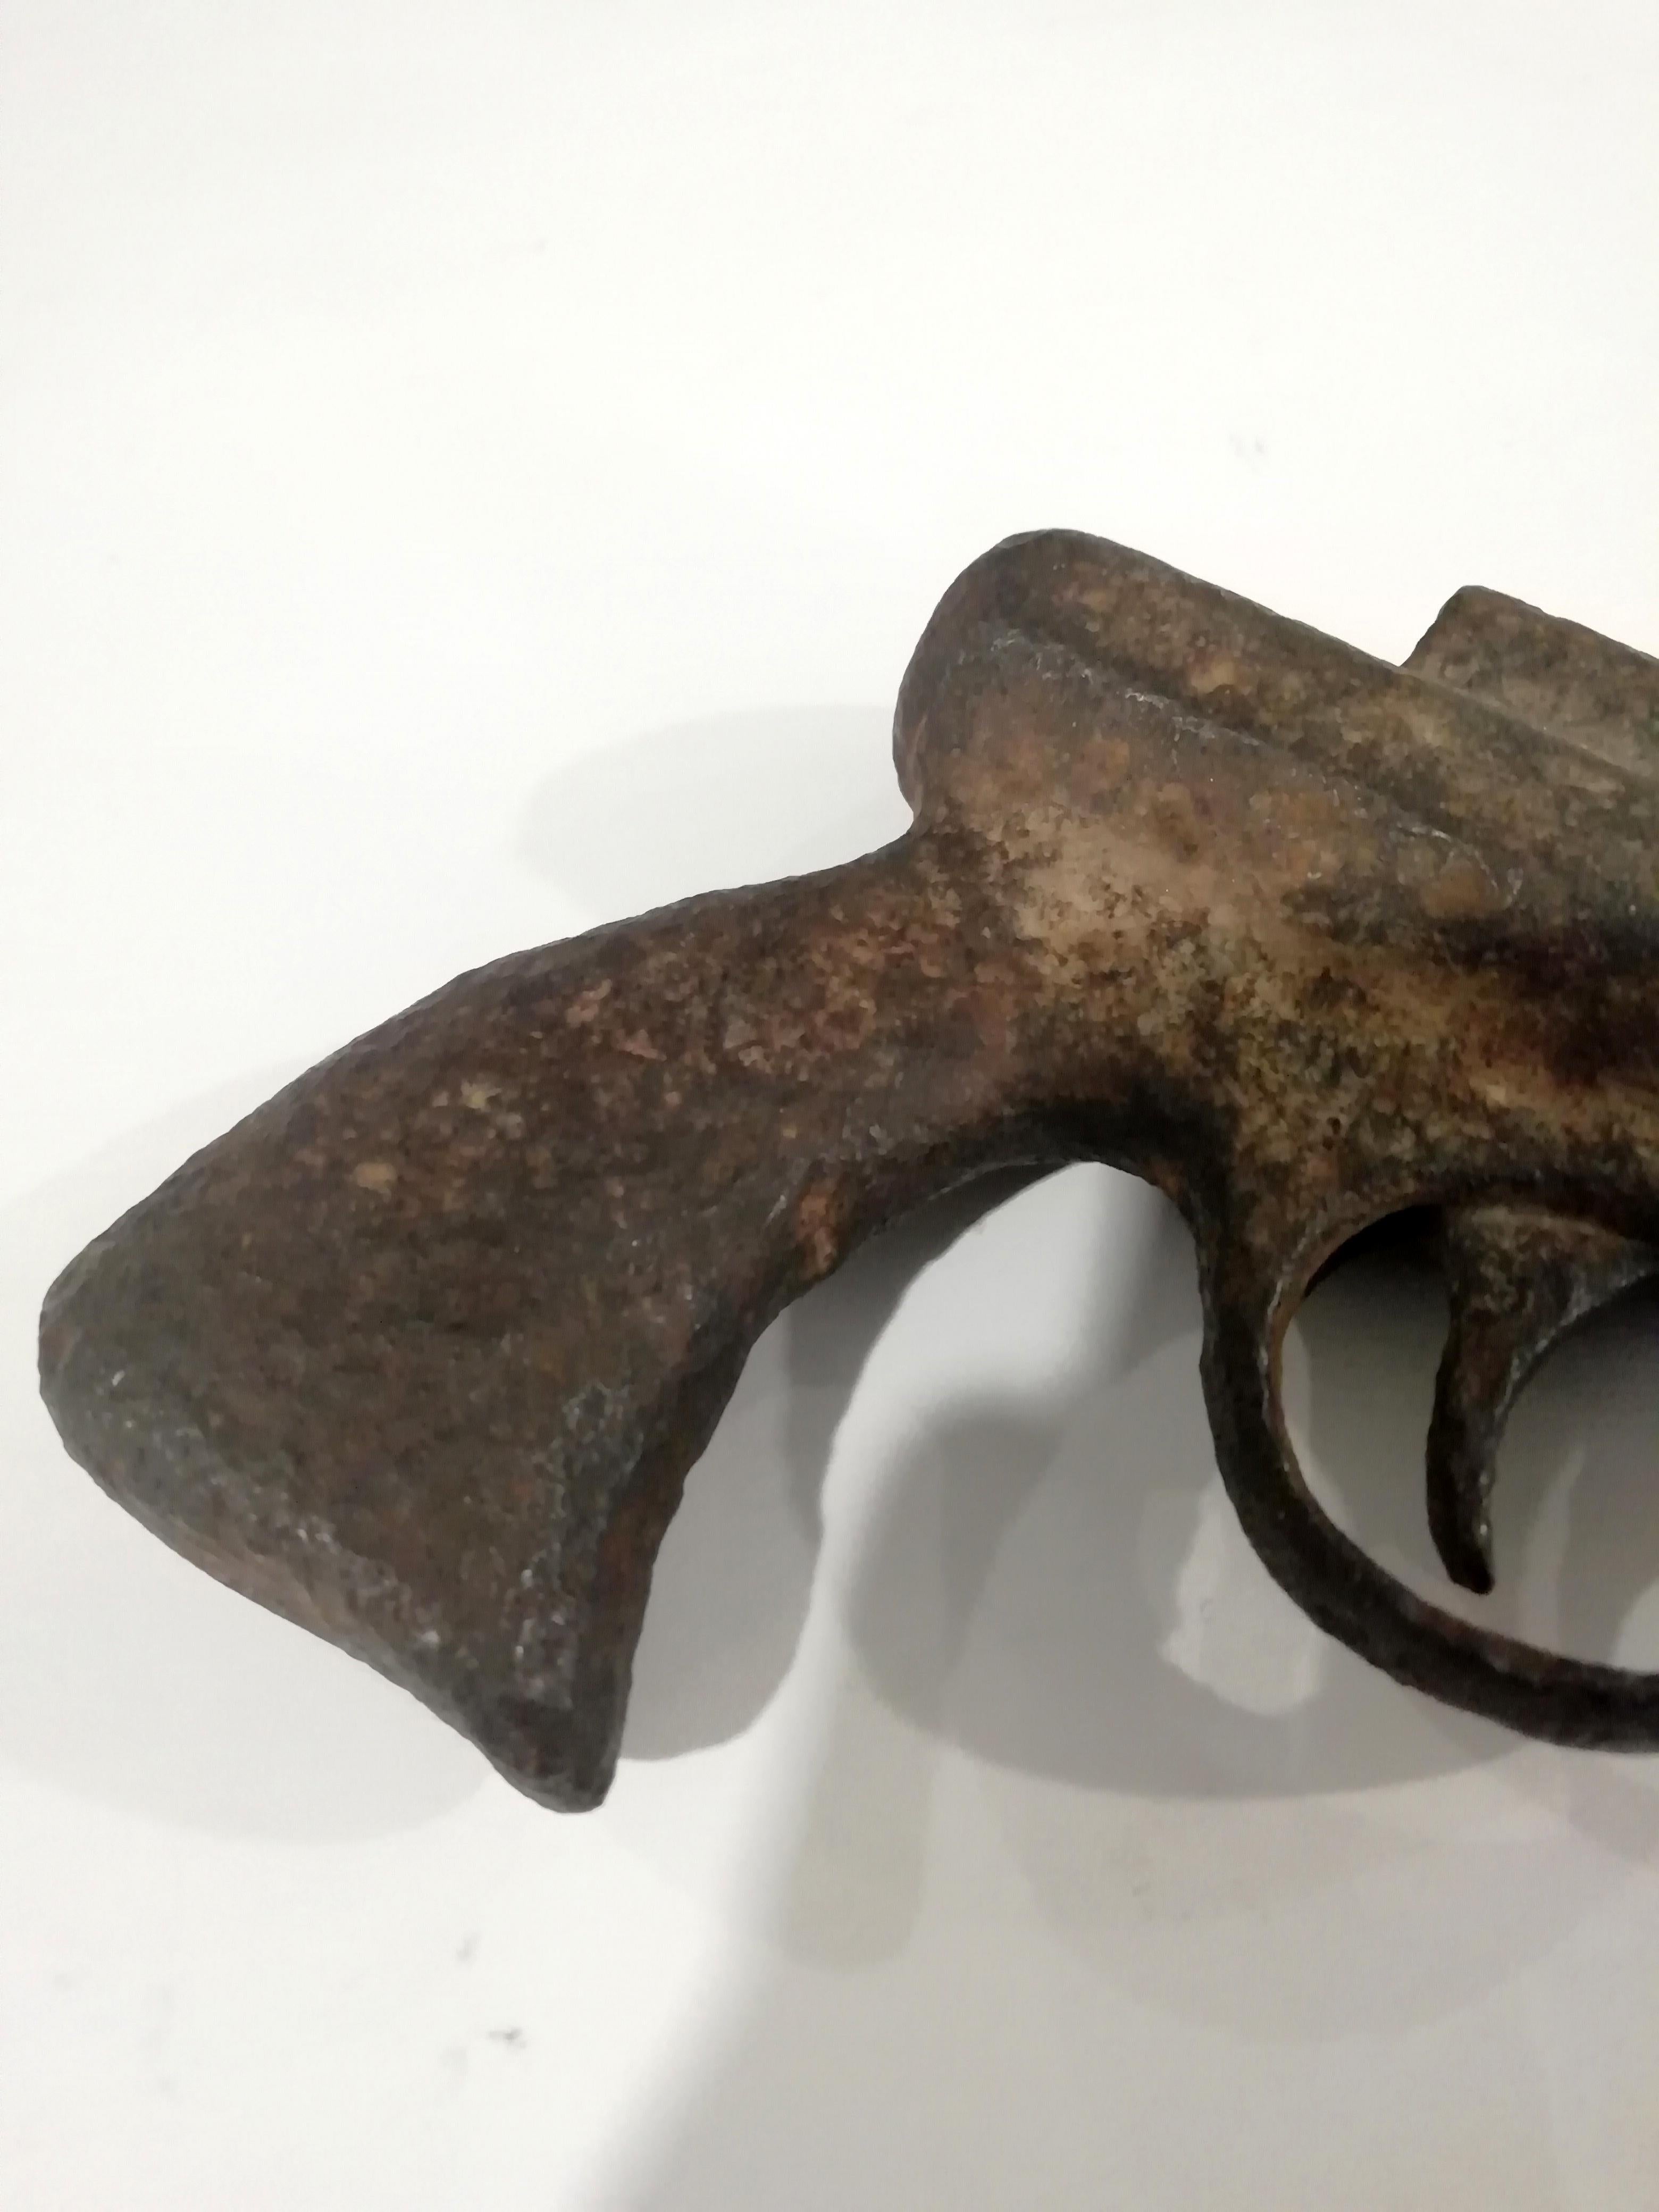 Antique rusty flare gun. The gun is useless and can be used as a paperweight.